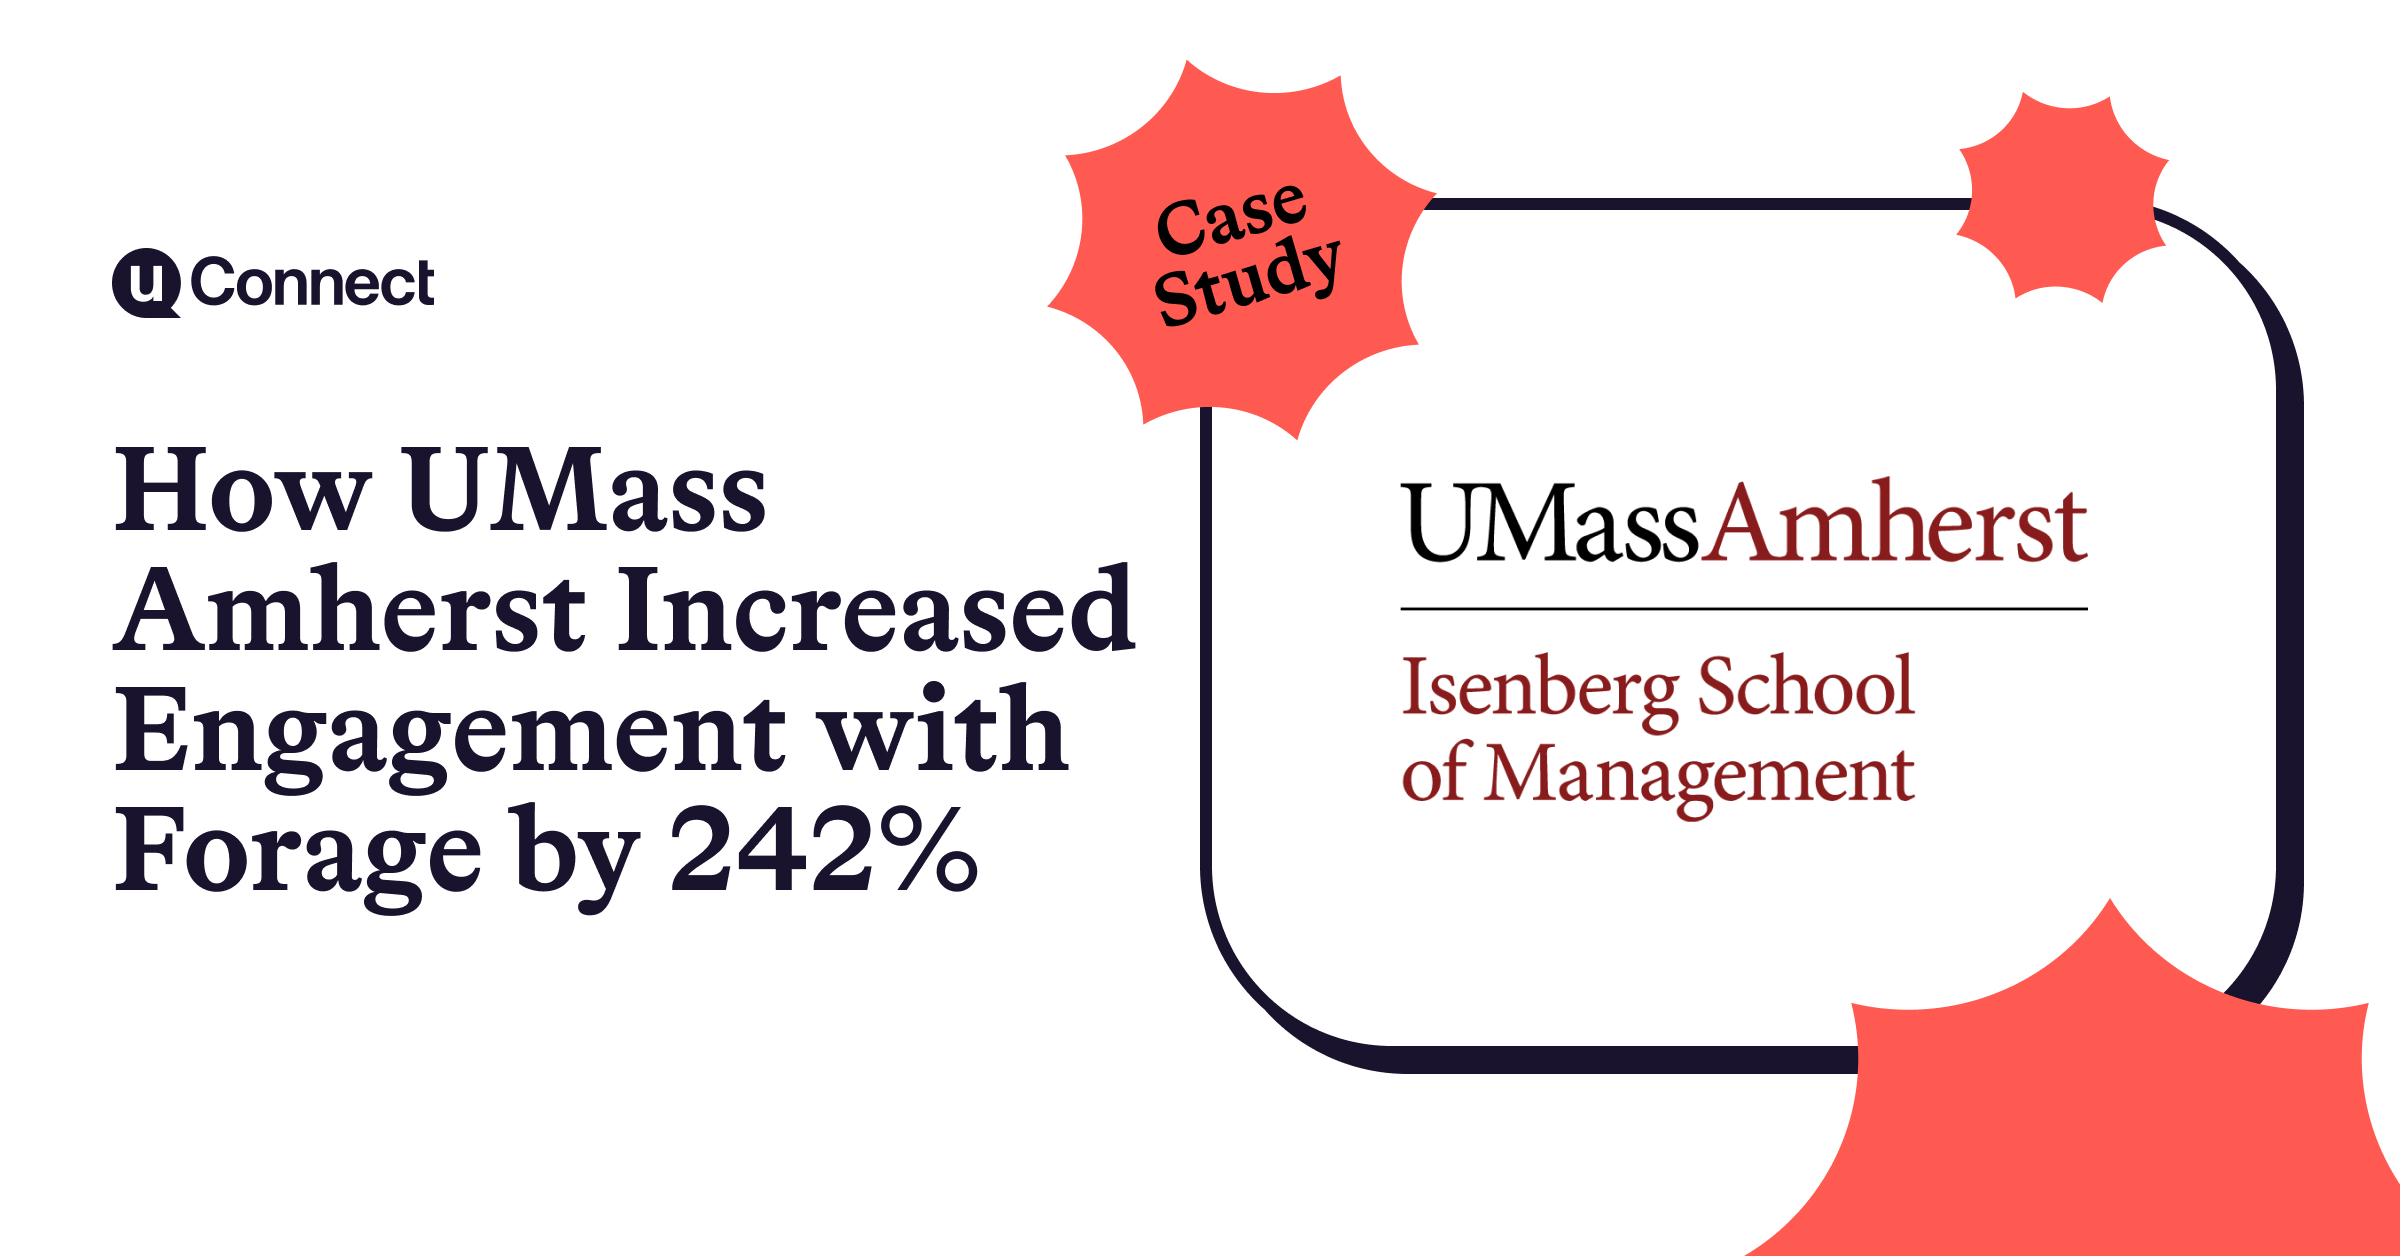 How UMass Amherst Increased Engagement with Forage Virtual Job Simulations by 242%